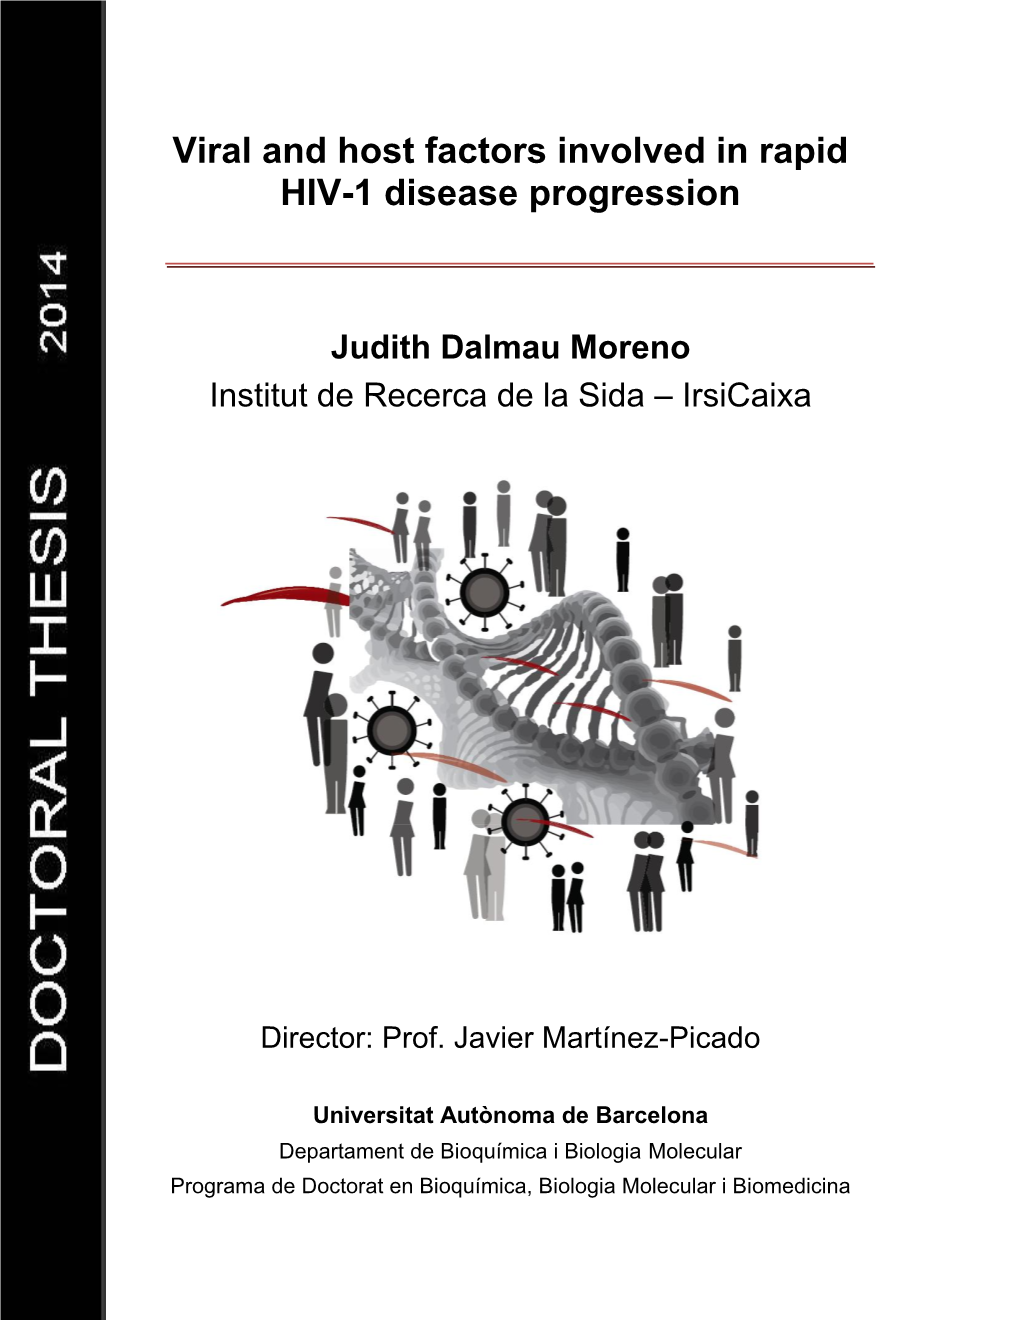 Viral and Host Factors Involved in Rapid HIV-1 Disease Progression